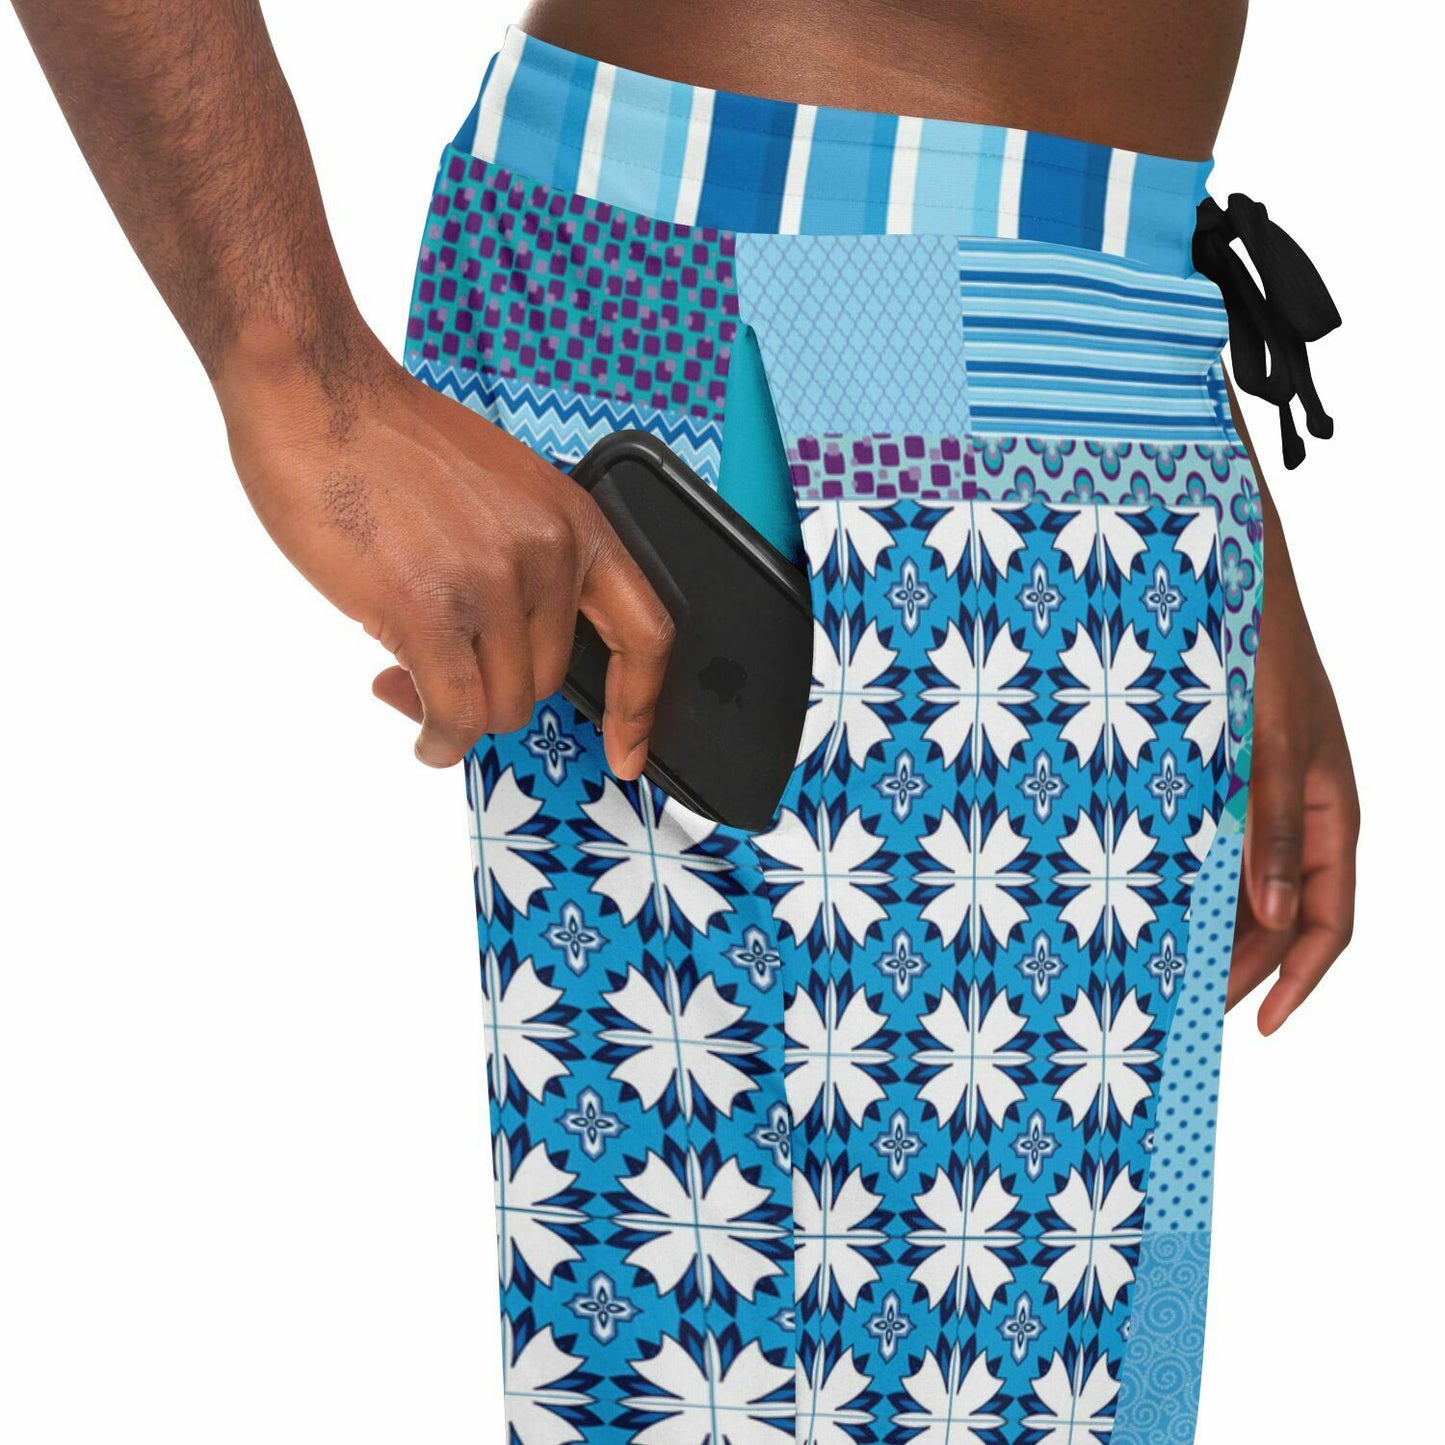 Blue Gypsy Patchwork Eco-Poly Unisex Joggers